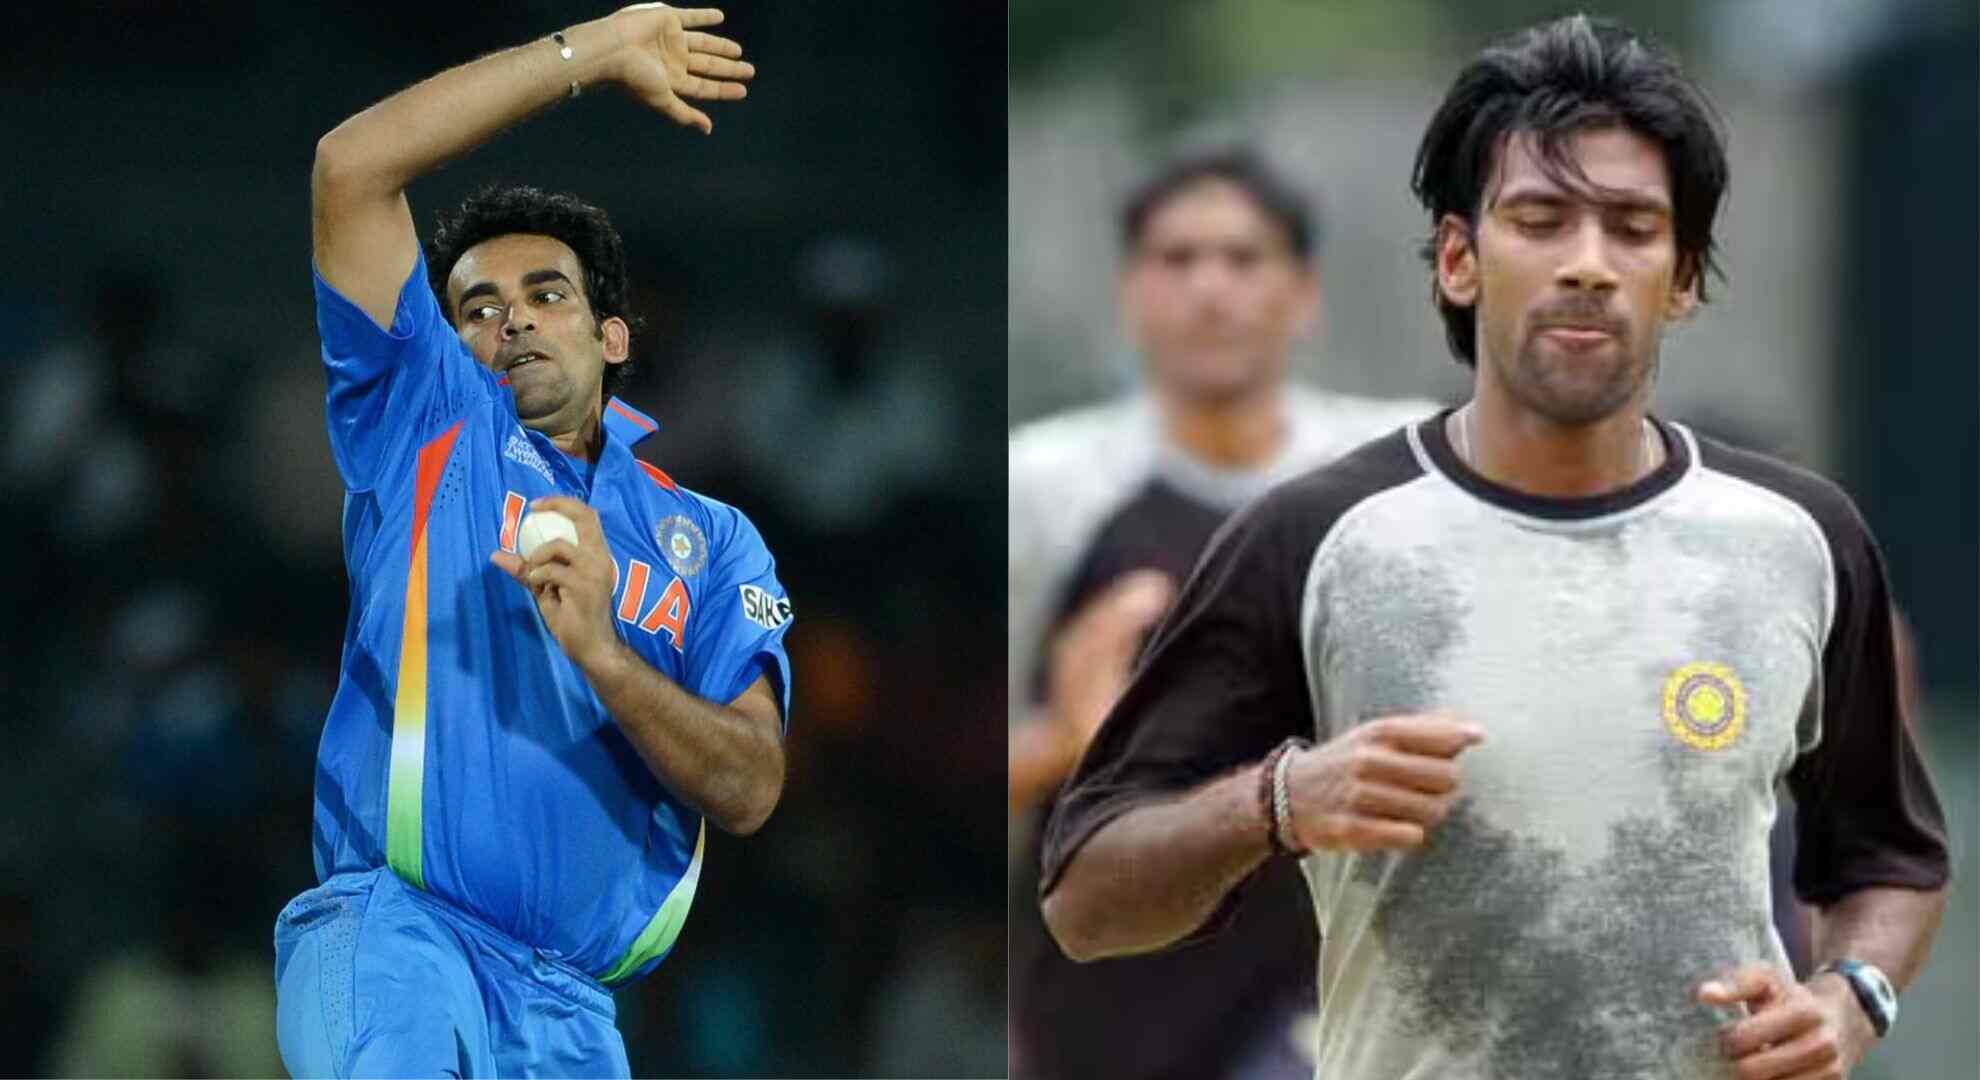 Zaheer Khan and Lakshmipathy Balaji Considered for India’s Bowling Coach Role